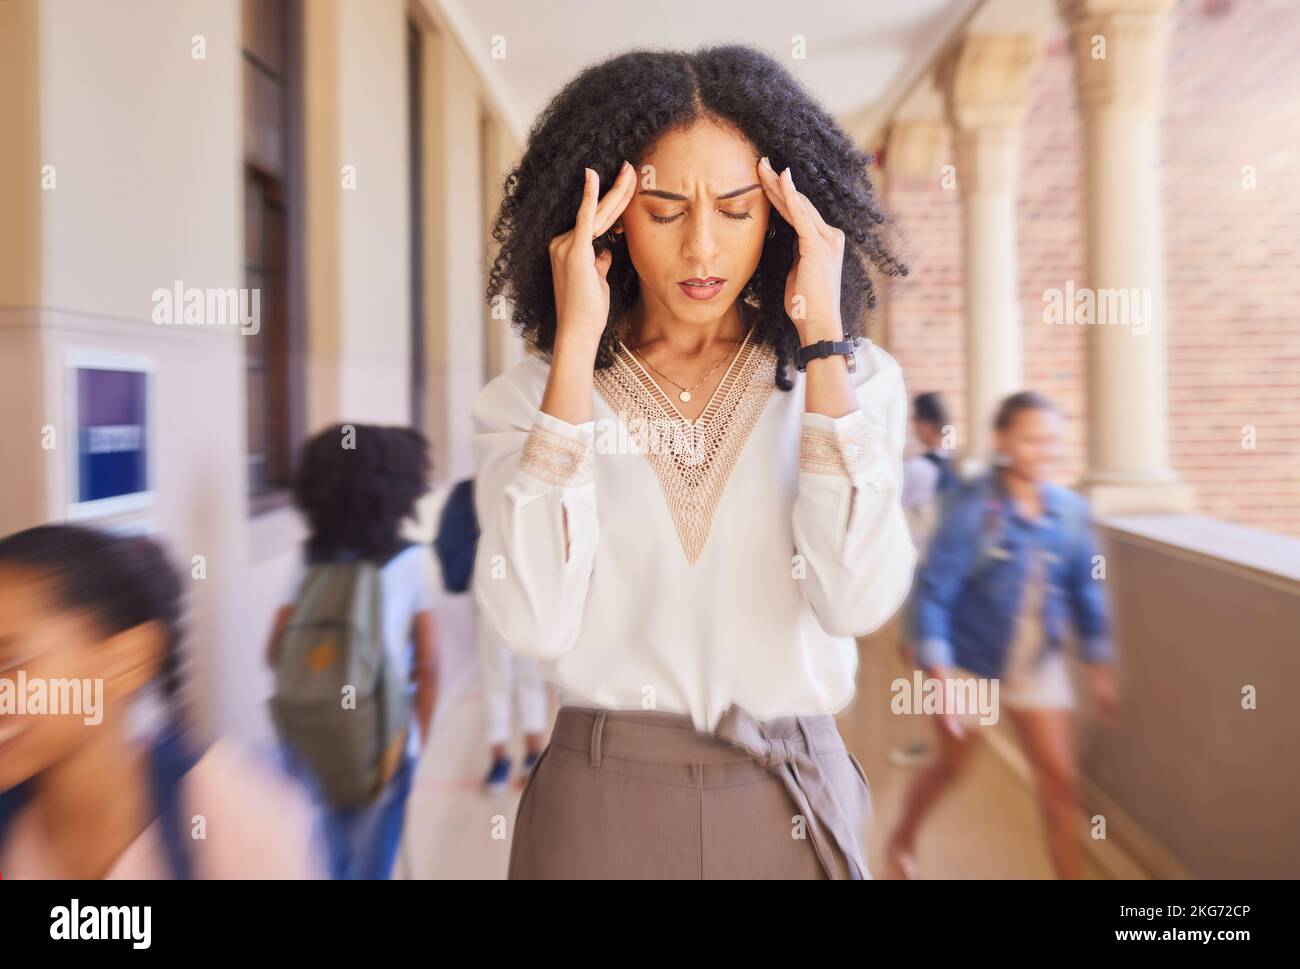 Headache, tired and stress teacher in school with fast children thinking of work stress, education mindset and management challenge in hall. Black Stock Photo